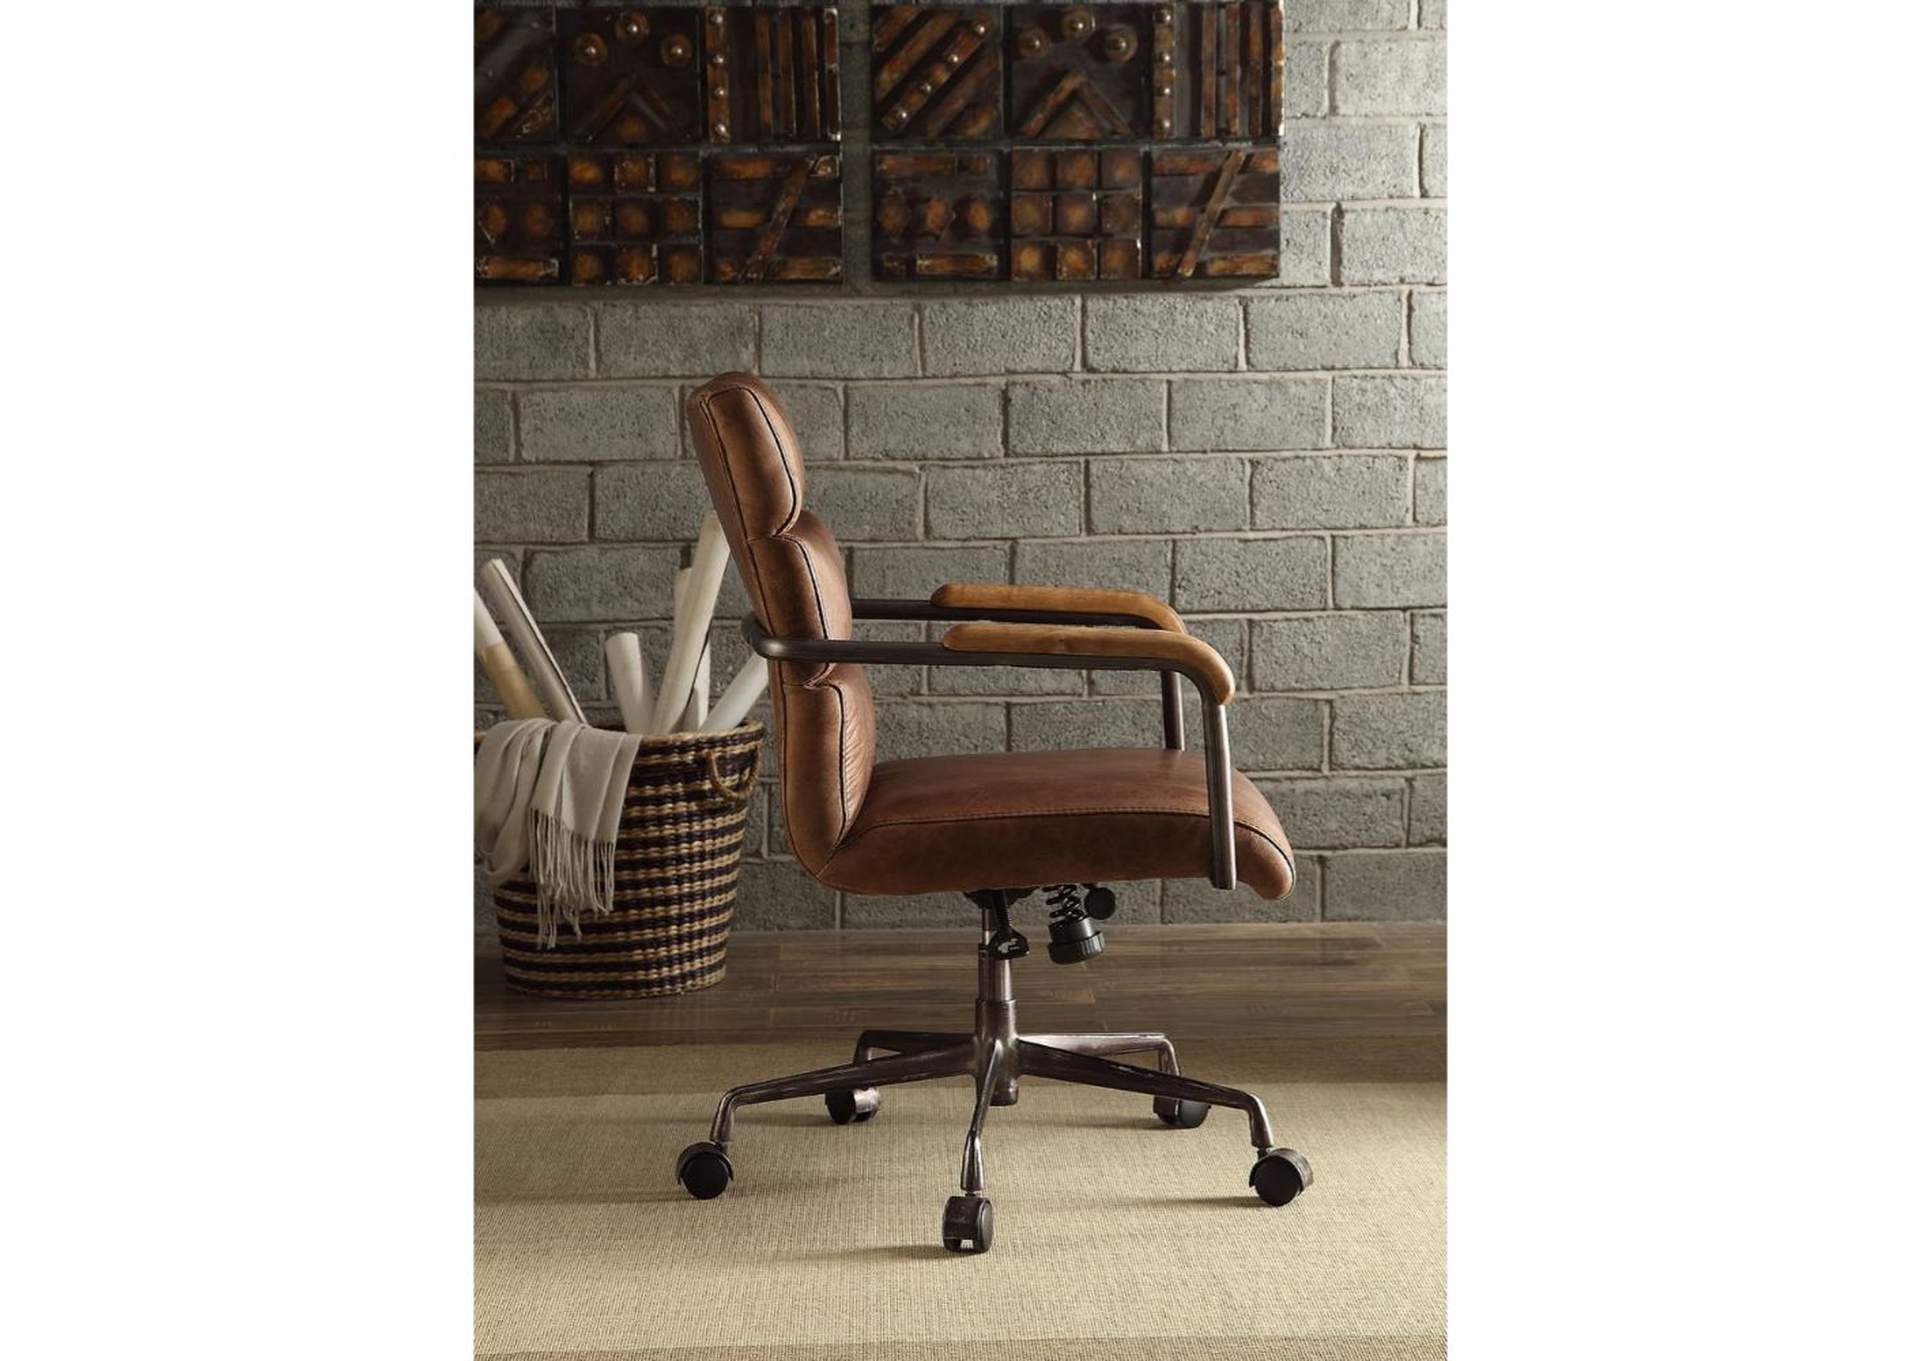 Harith Retro Brown Top Grain Leather Executive Office Chair,Acme